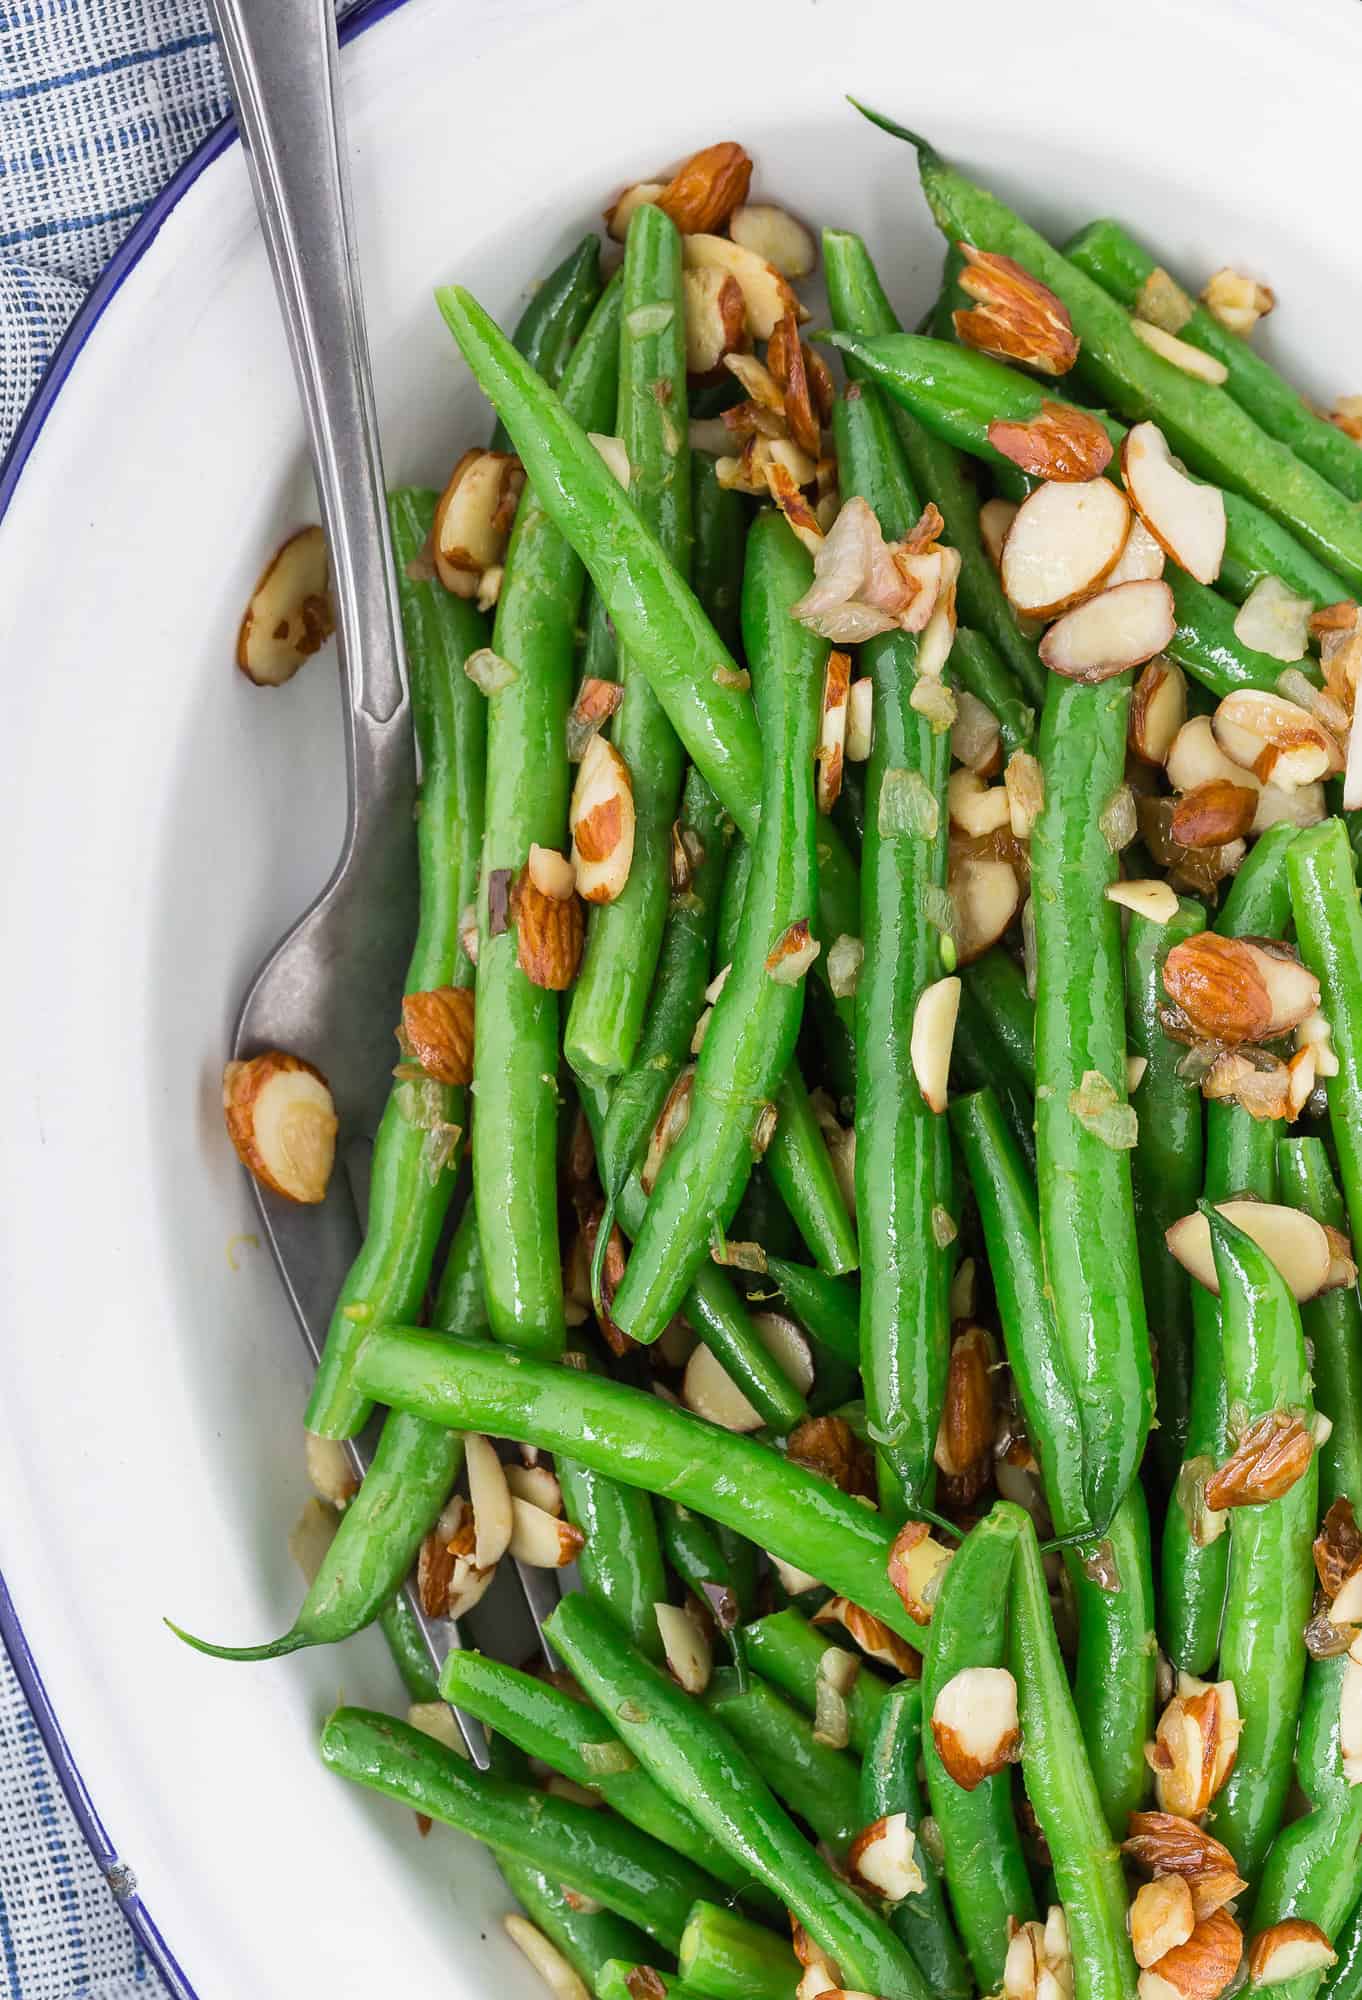 Green beans with lemon zest and almonds.